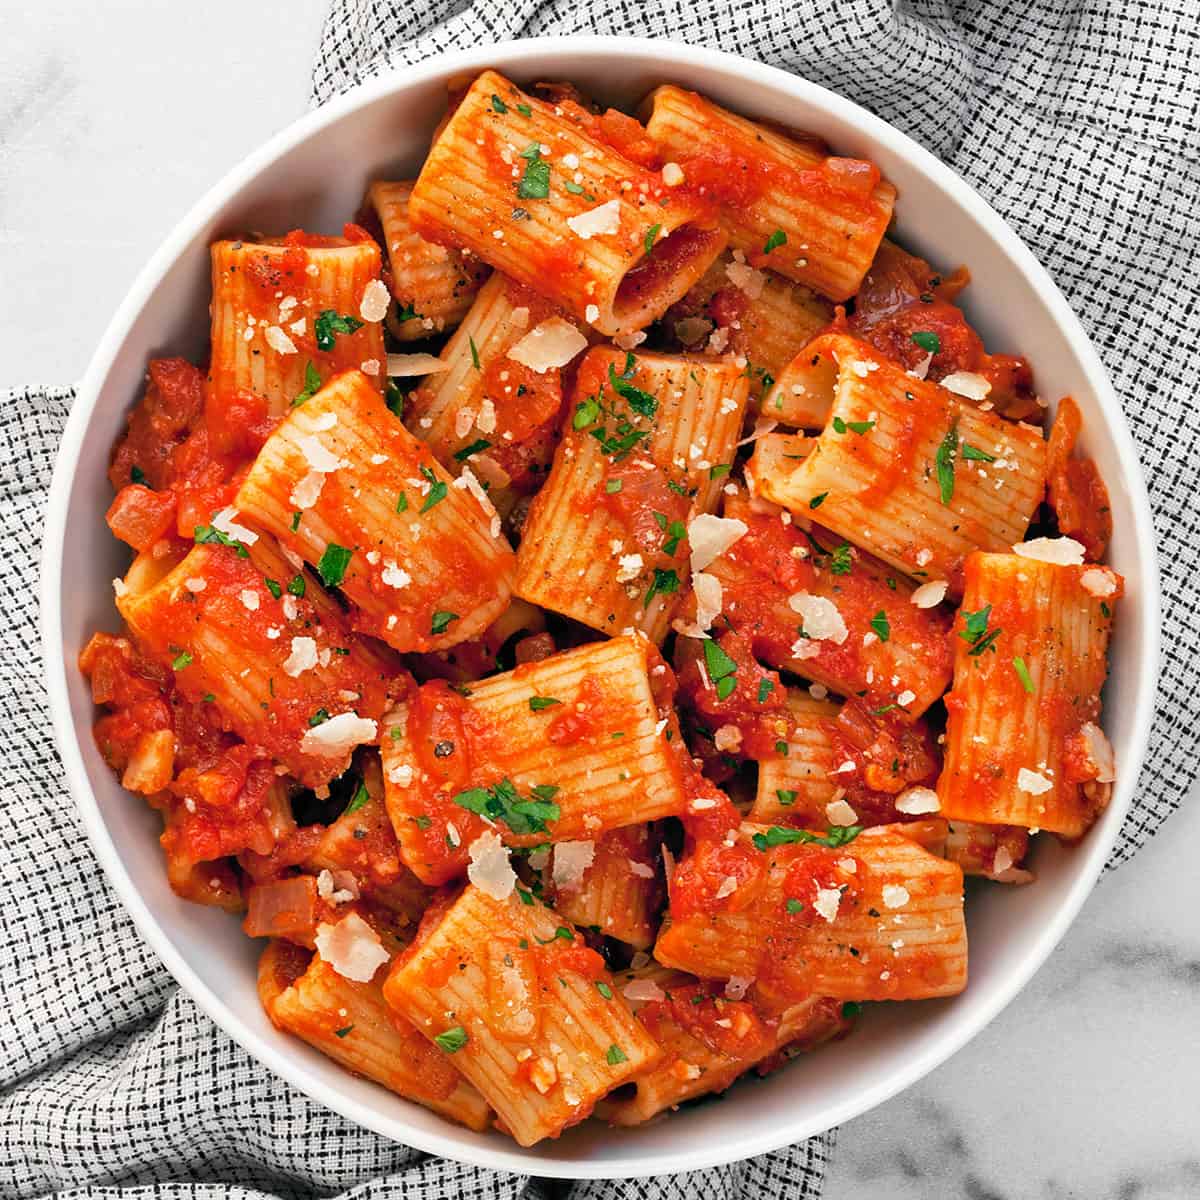 Rigatoni Pomodoro - Sprinkles and Sprouts